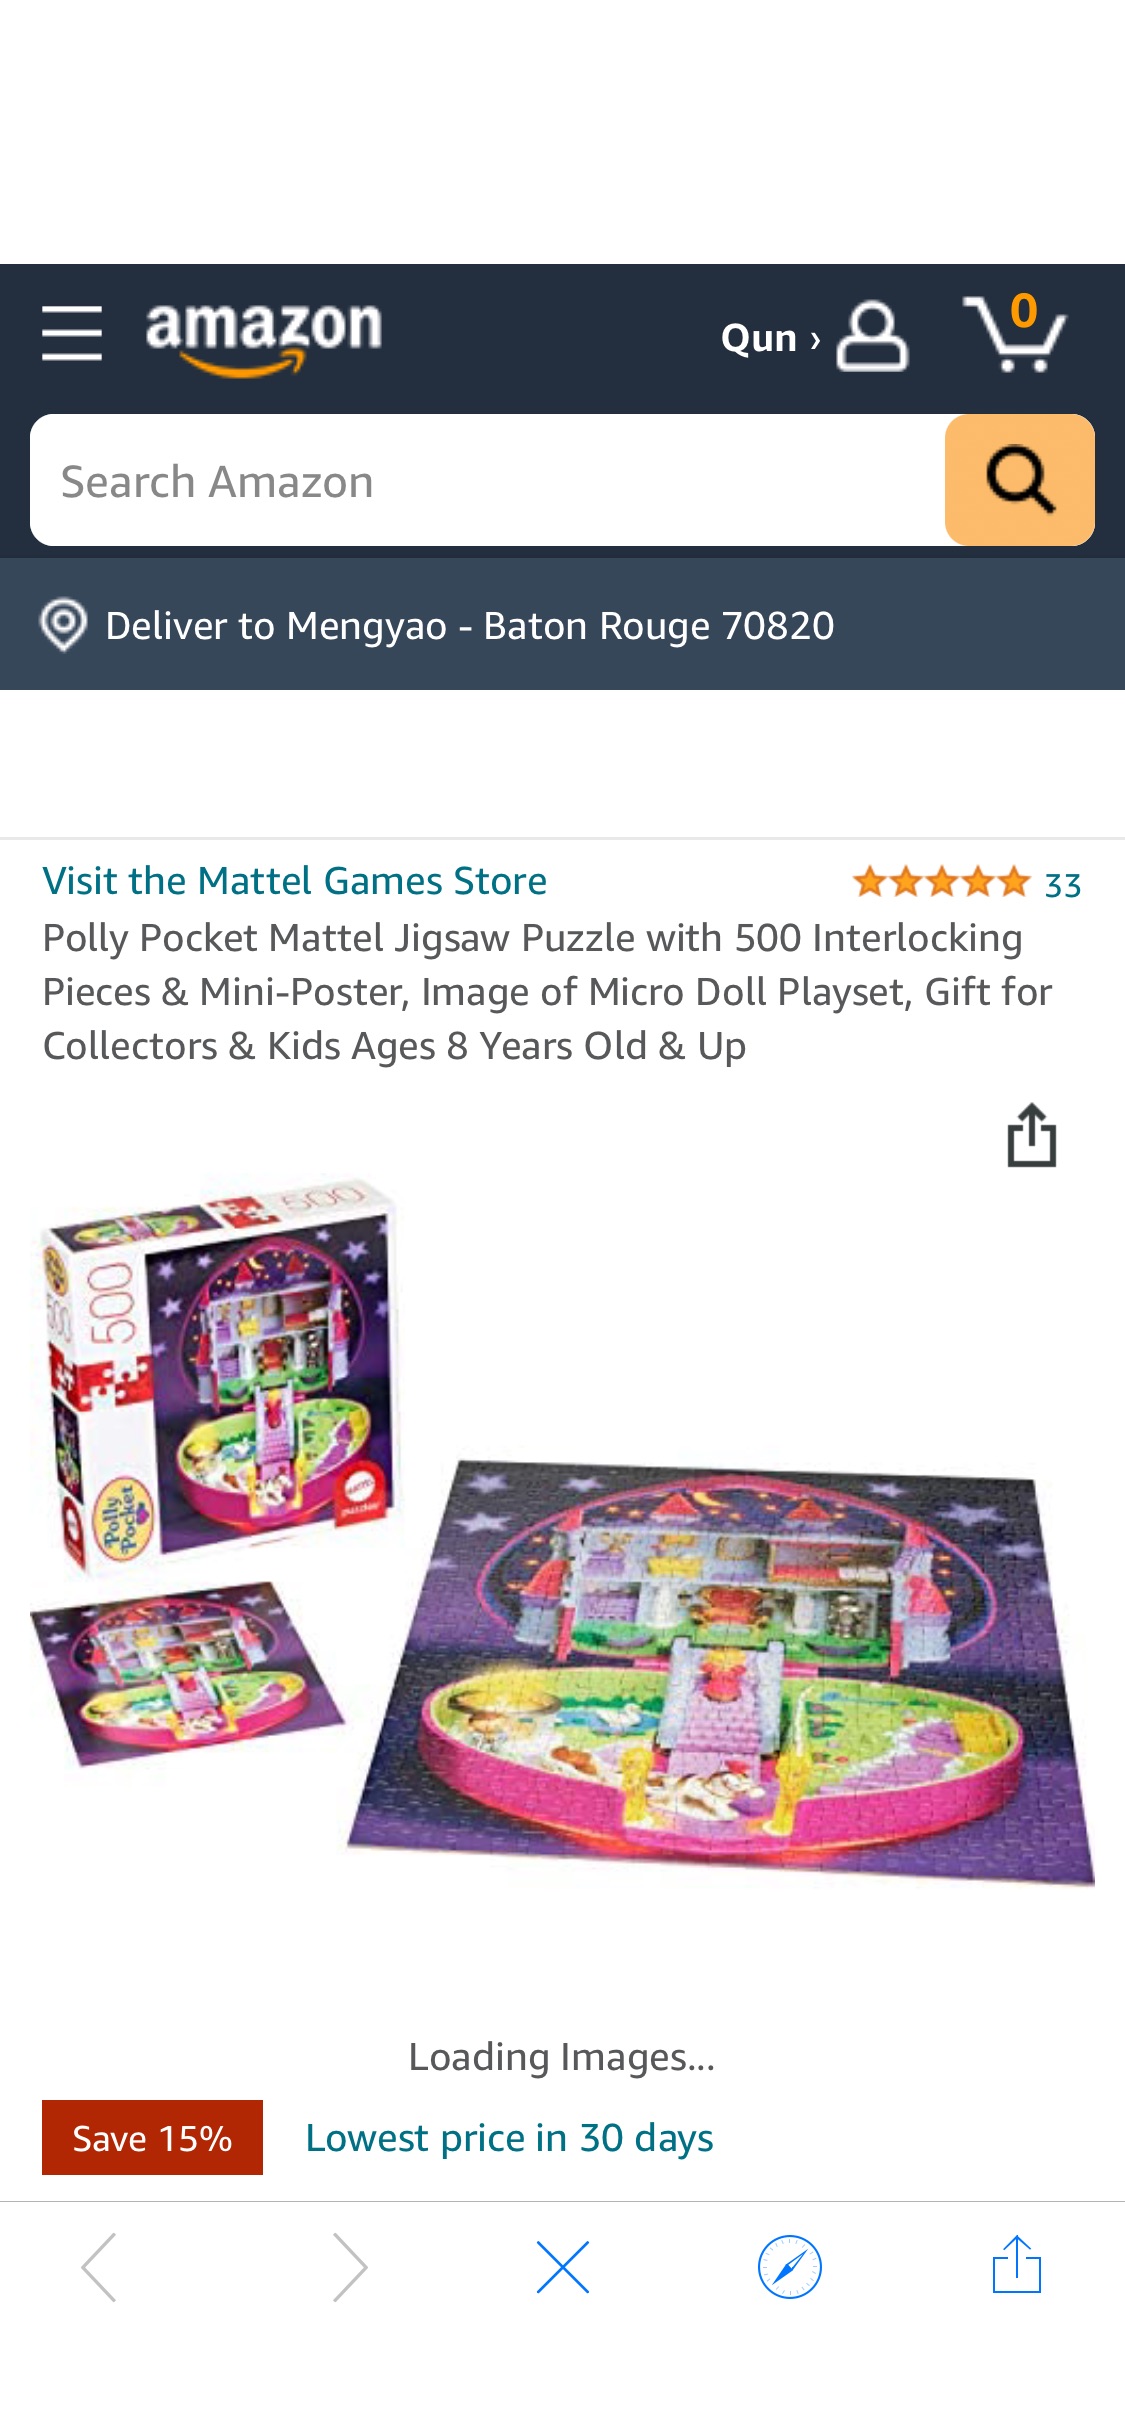 Amazon.com: Polly Pocket Mattel Jigsaw Puzzle with 500 Interlocking Pieces & Mini-Poster, Image of Micro Doll Playset, Gift for Collectors & Kids Ages 8 Years Old & Up : Toys 玩具& Games